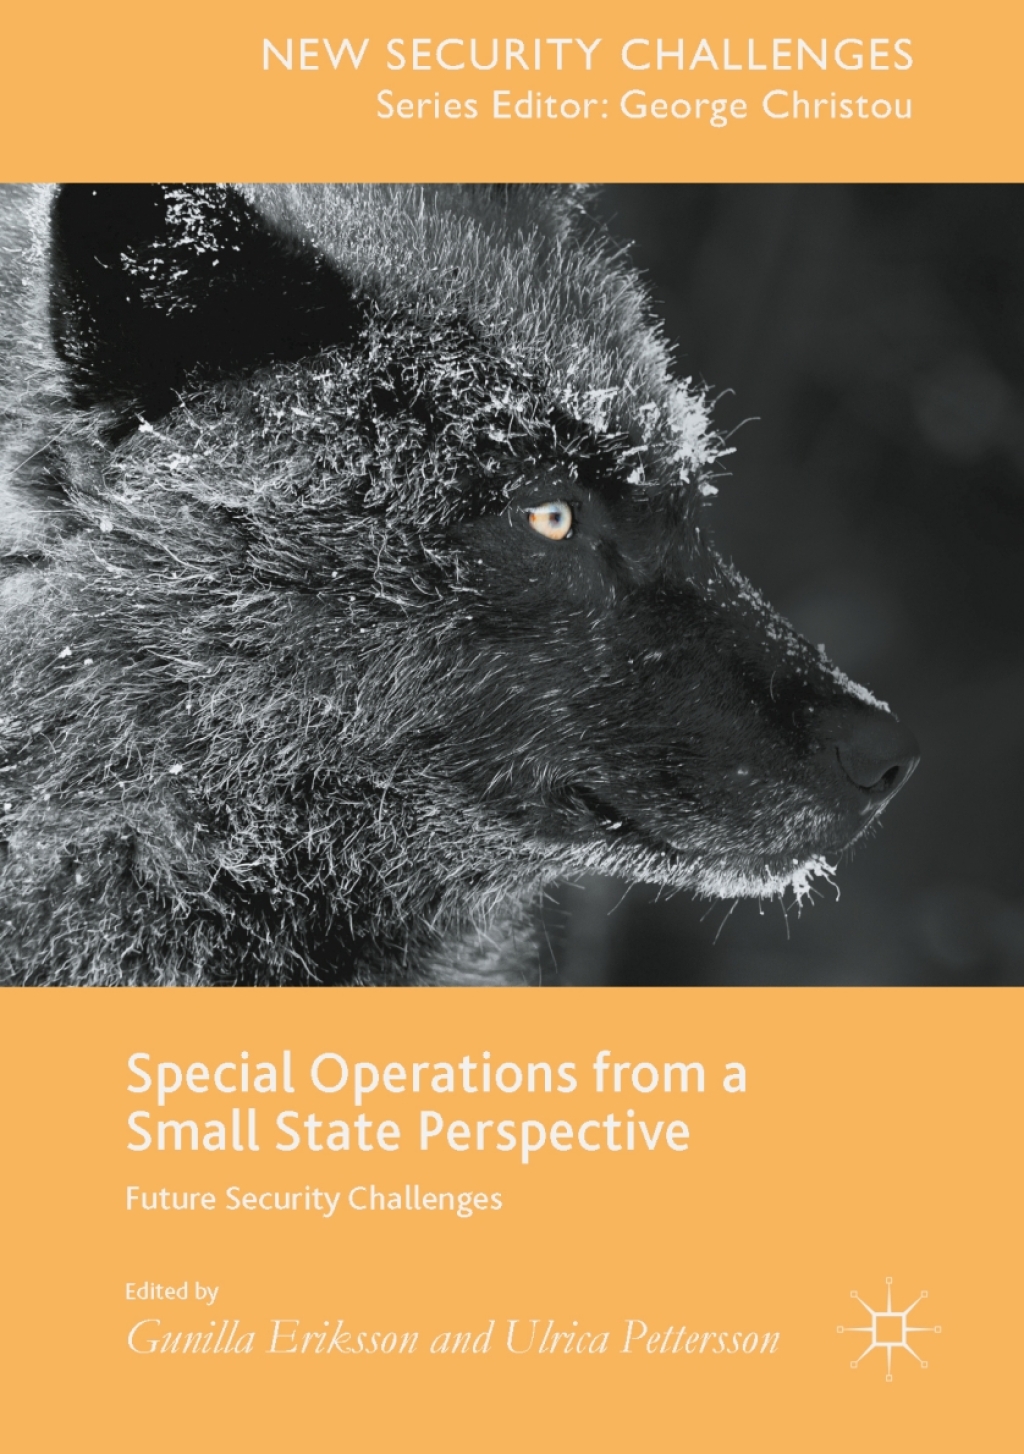 Special Operations from a Small State Perspective (eBook Rental) - Gunilla Eriksson,